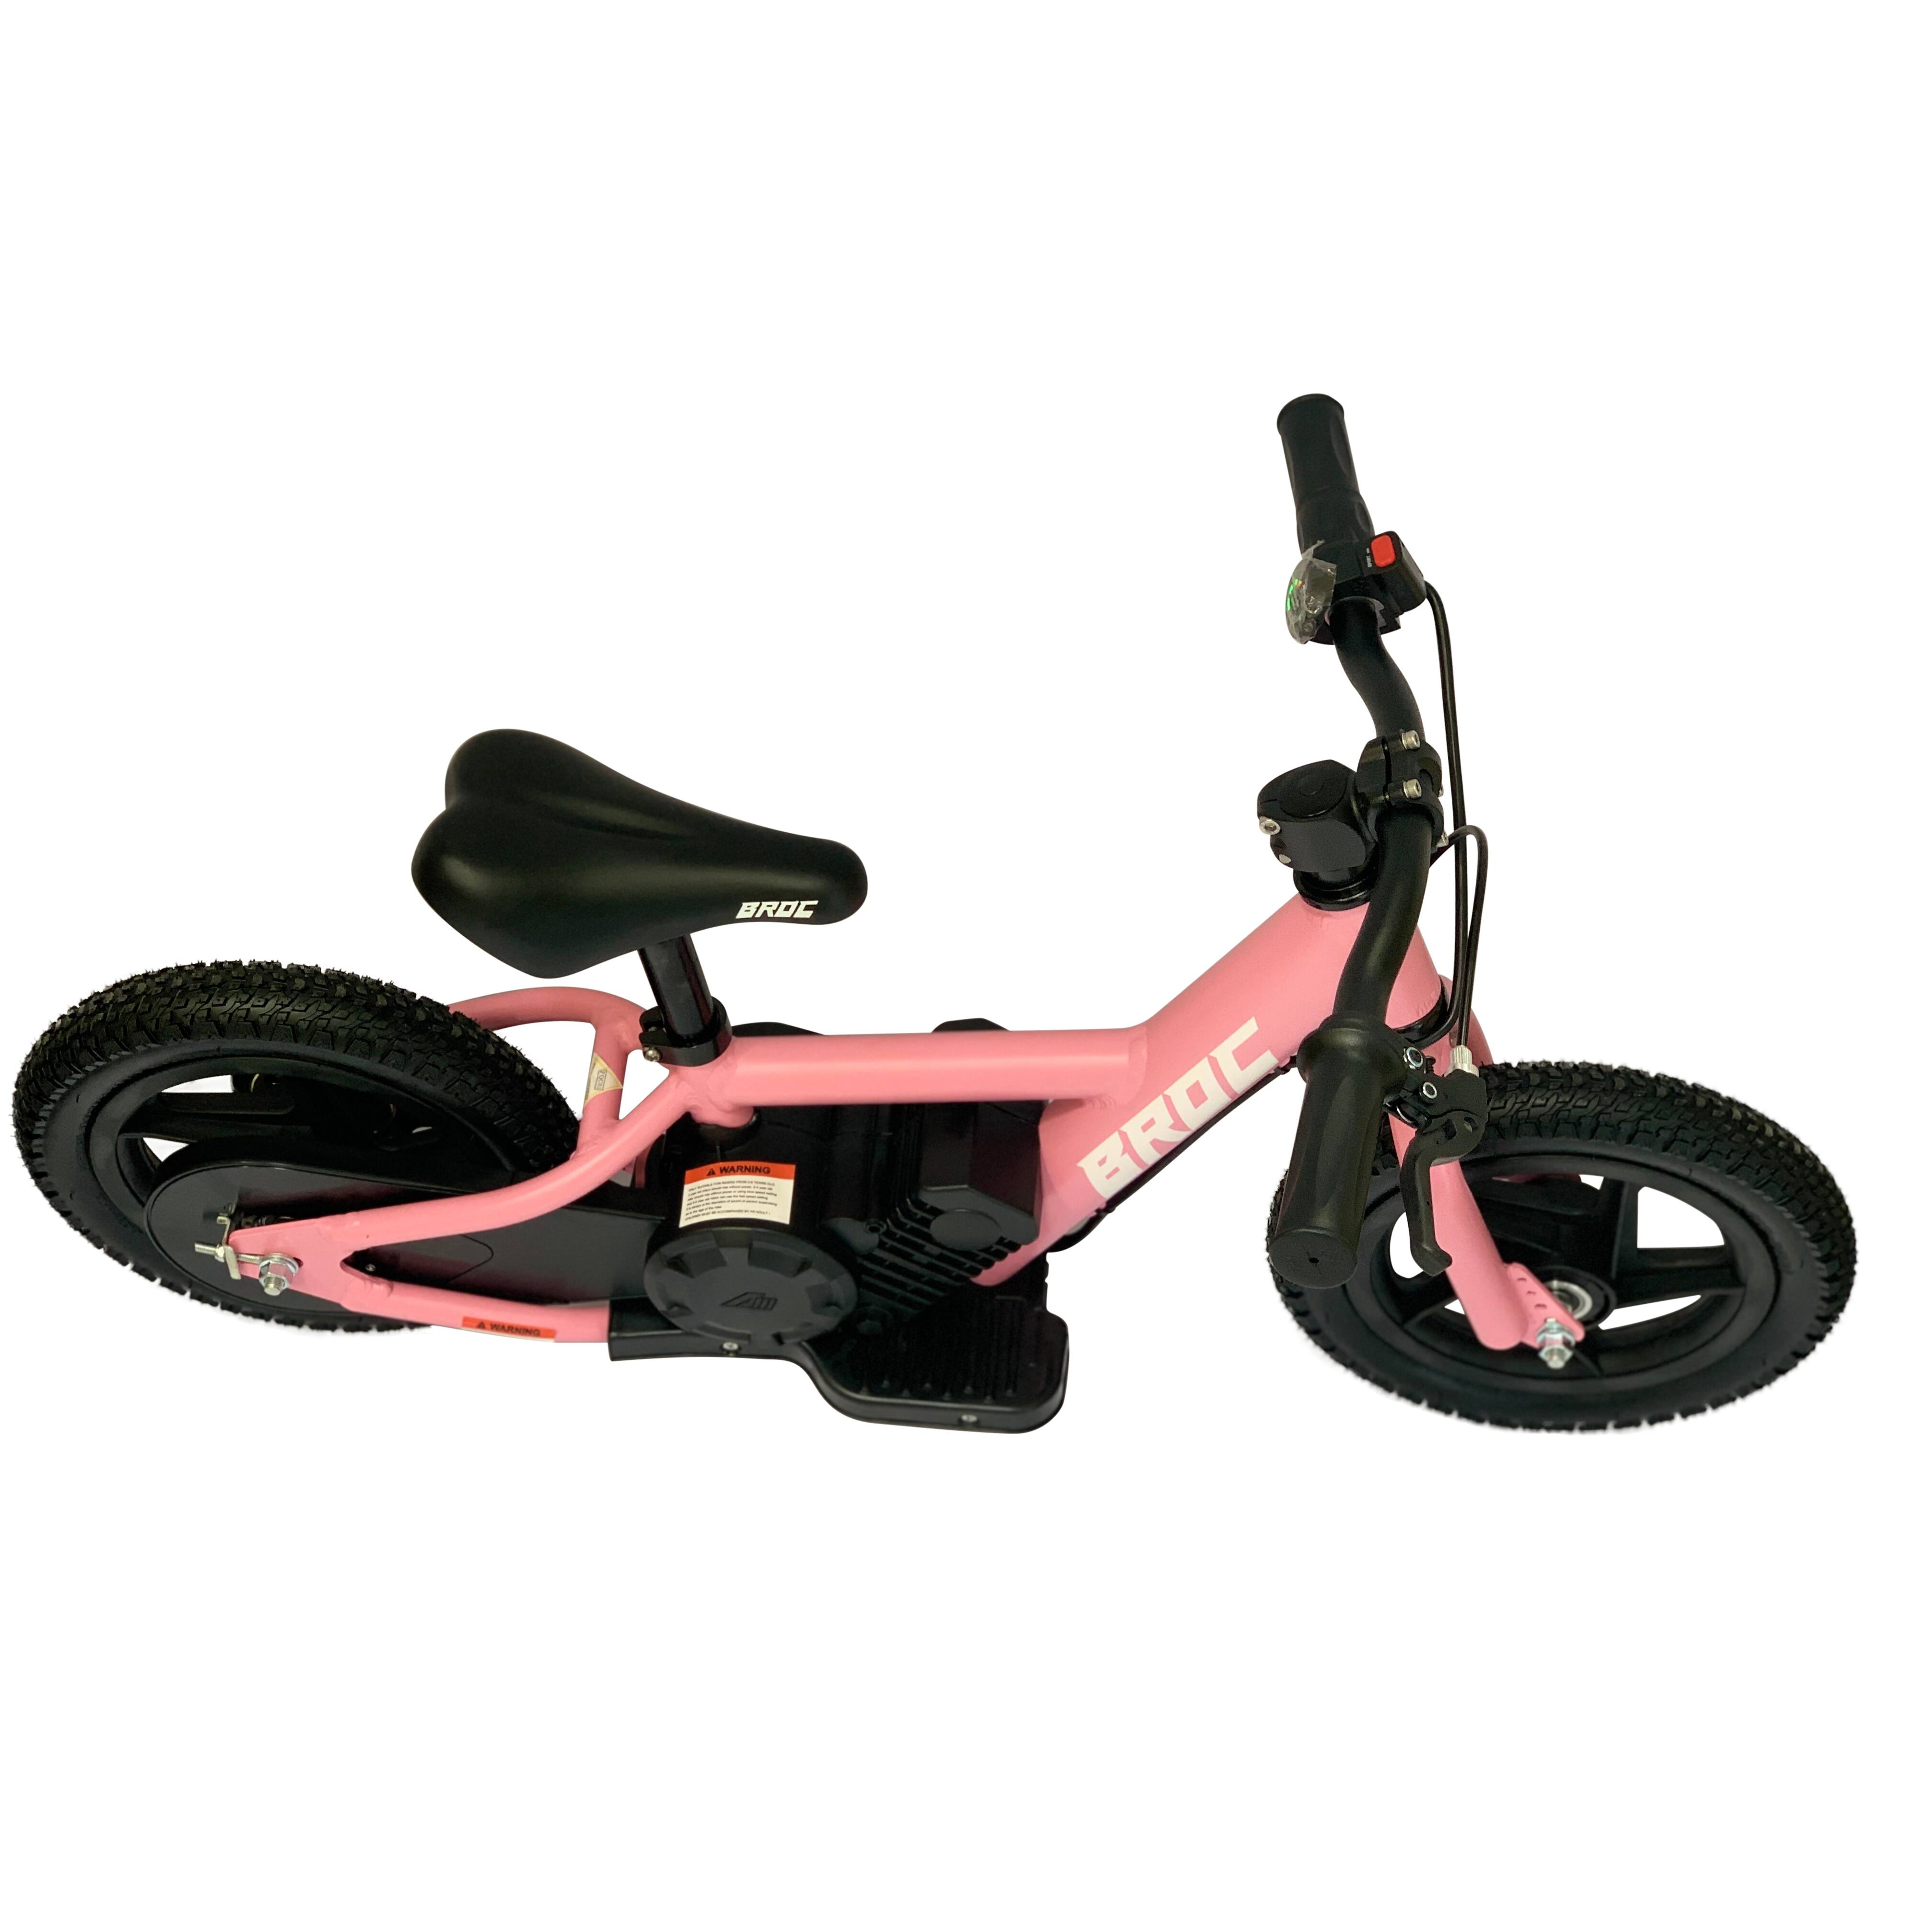  BROC USA Ebike for Kids, 12 Inch 24V Battery Operated, Pink :  Sports & Outdoors